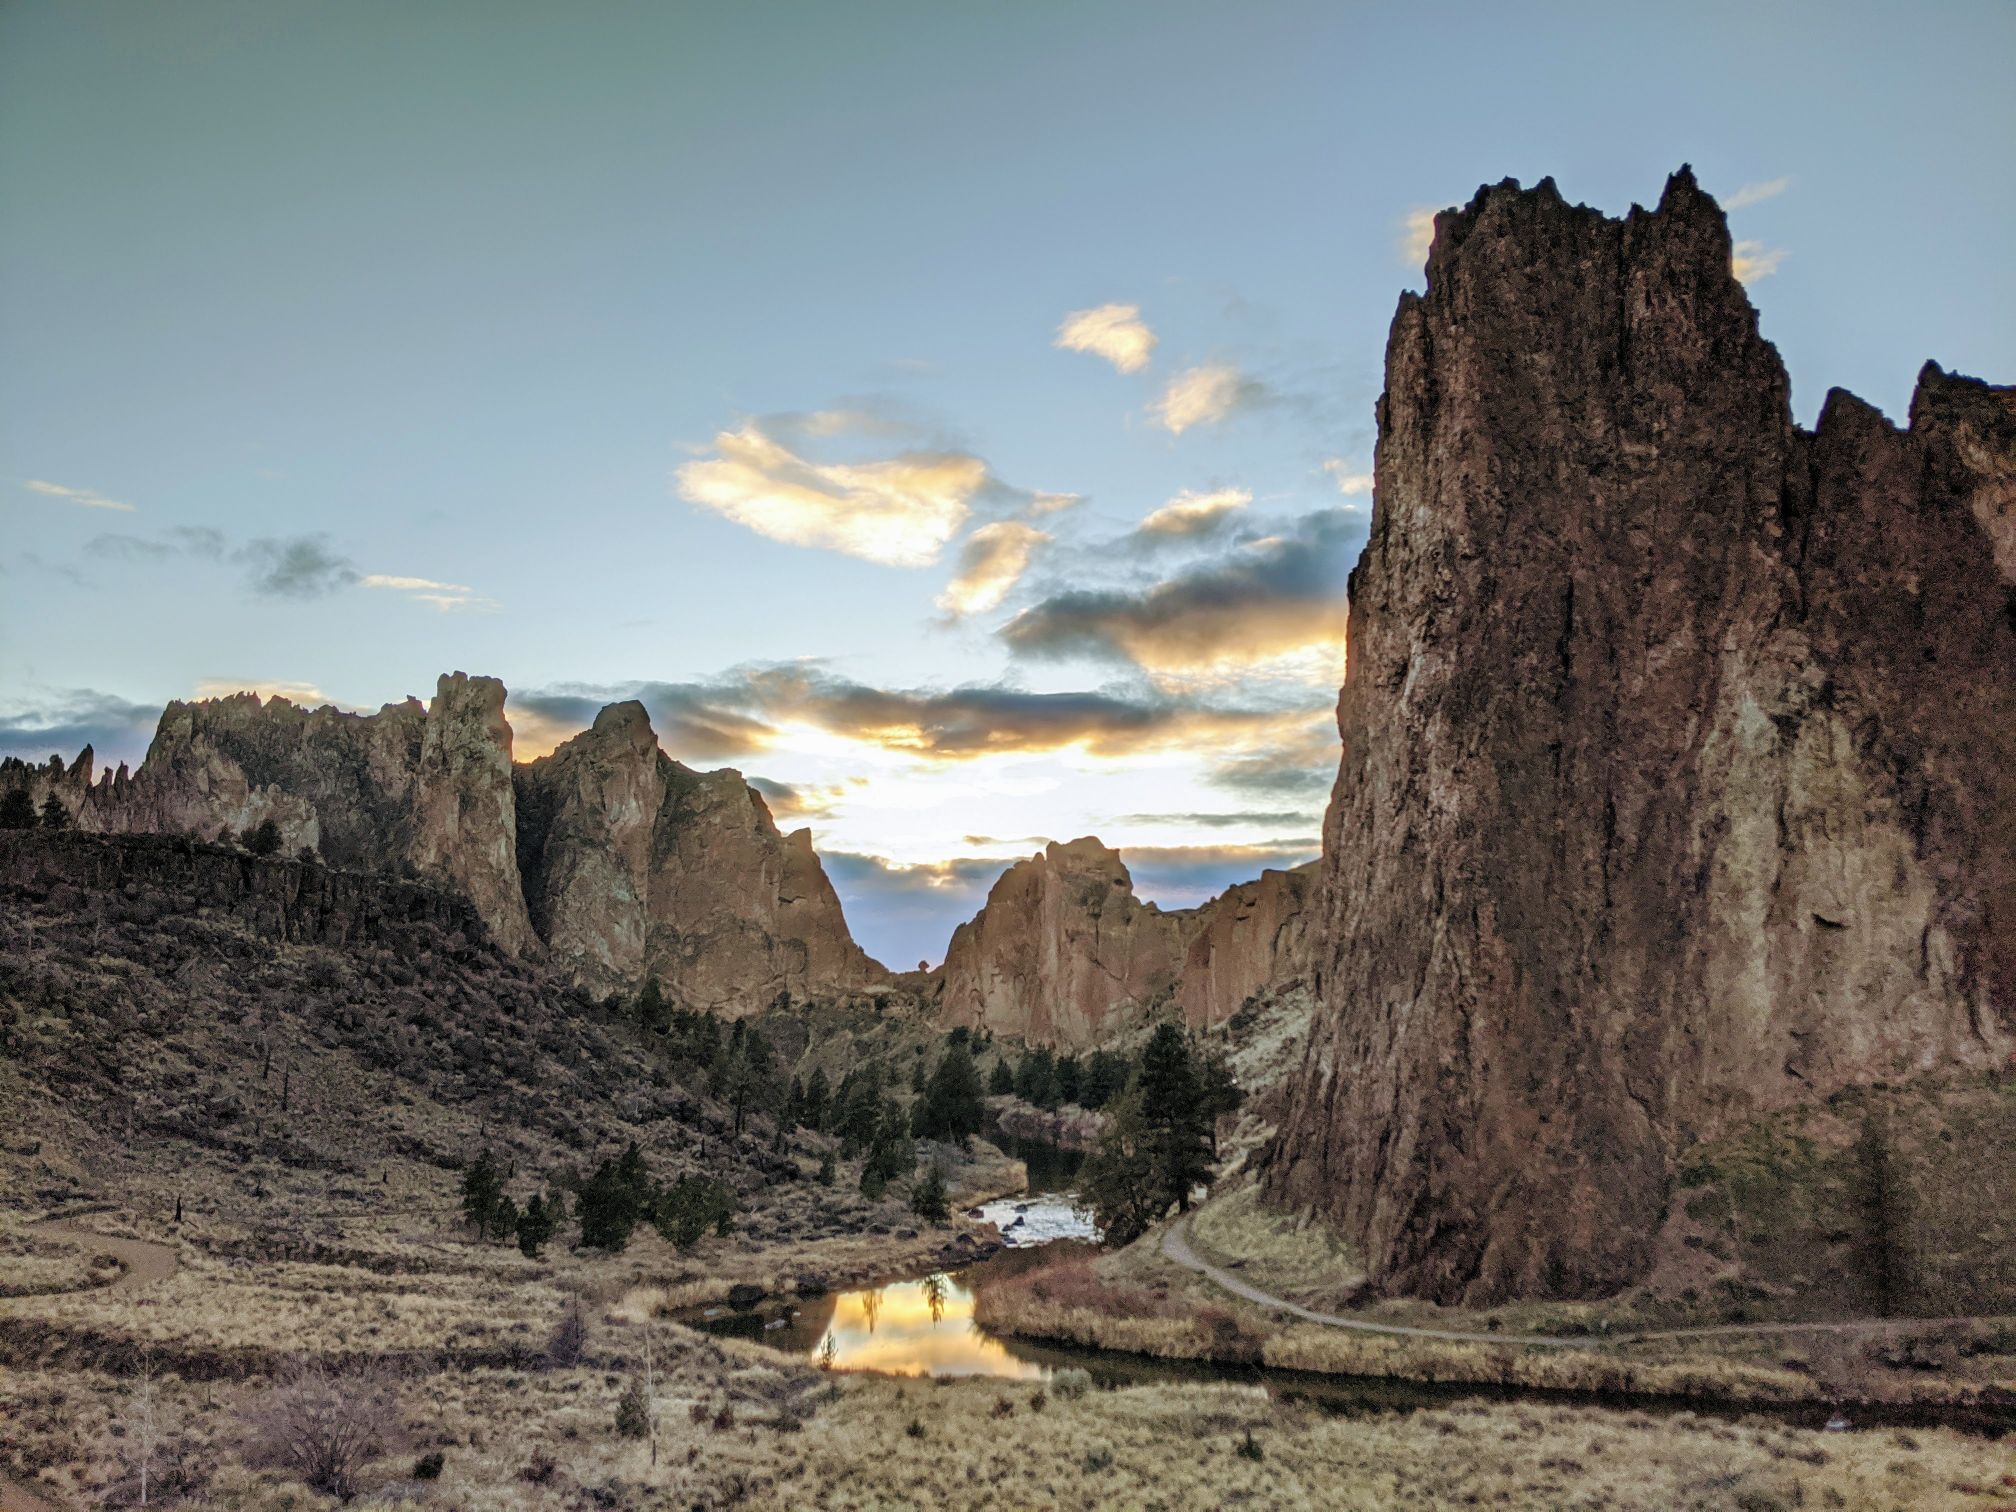 [Trip Report] Smith Rock - March 2020